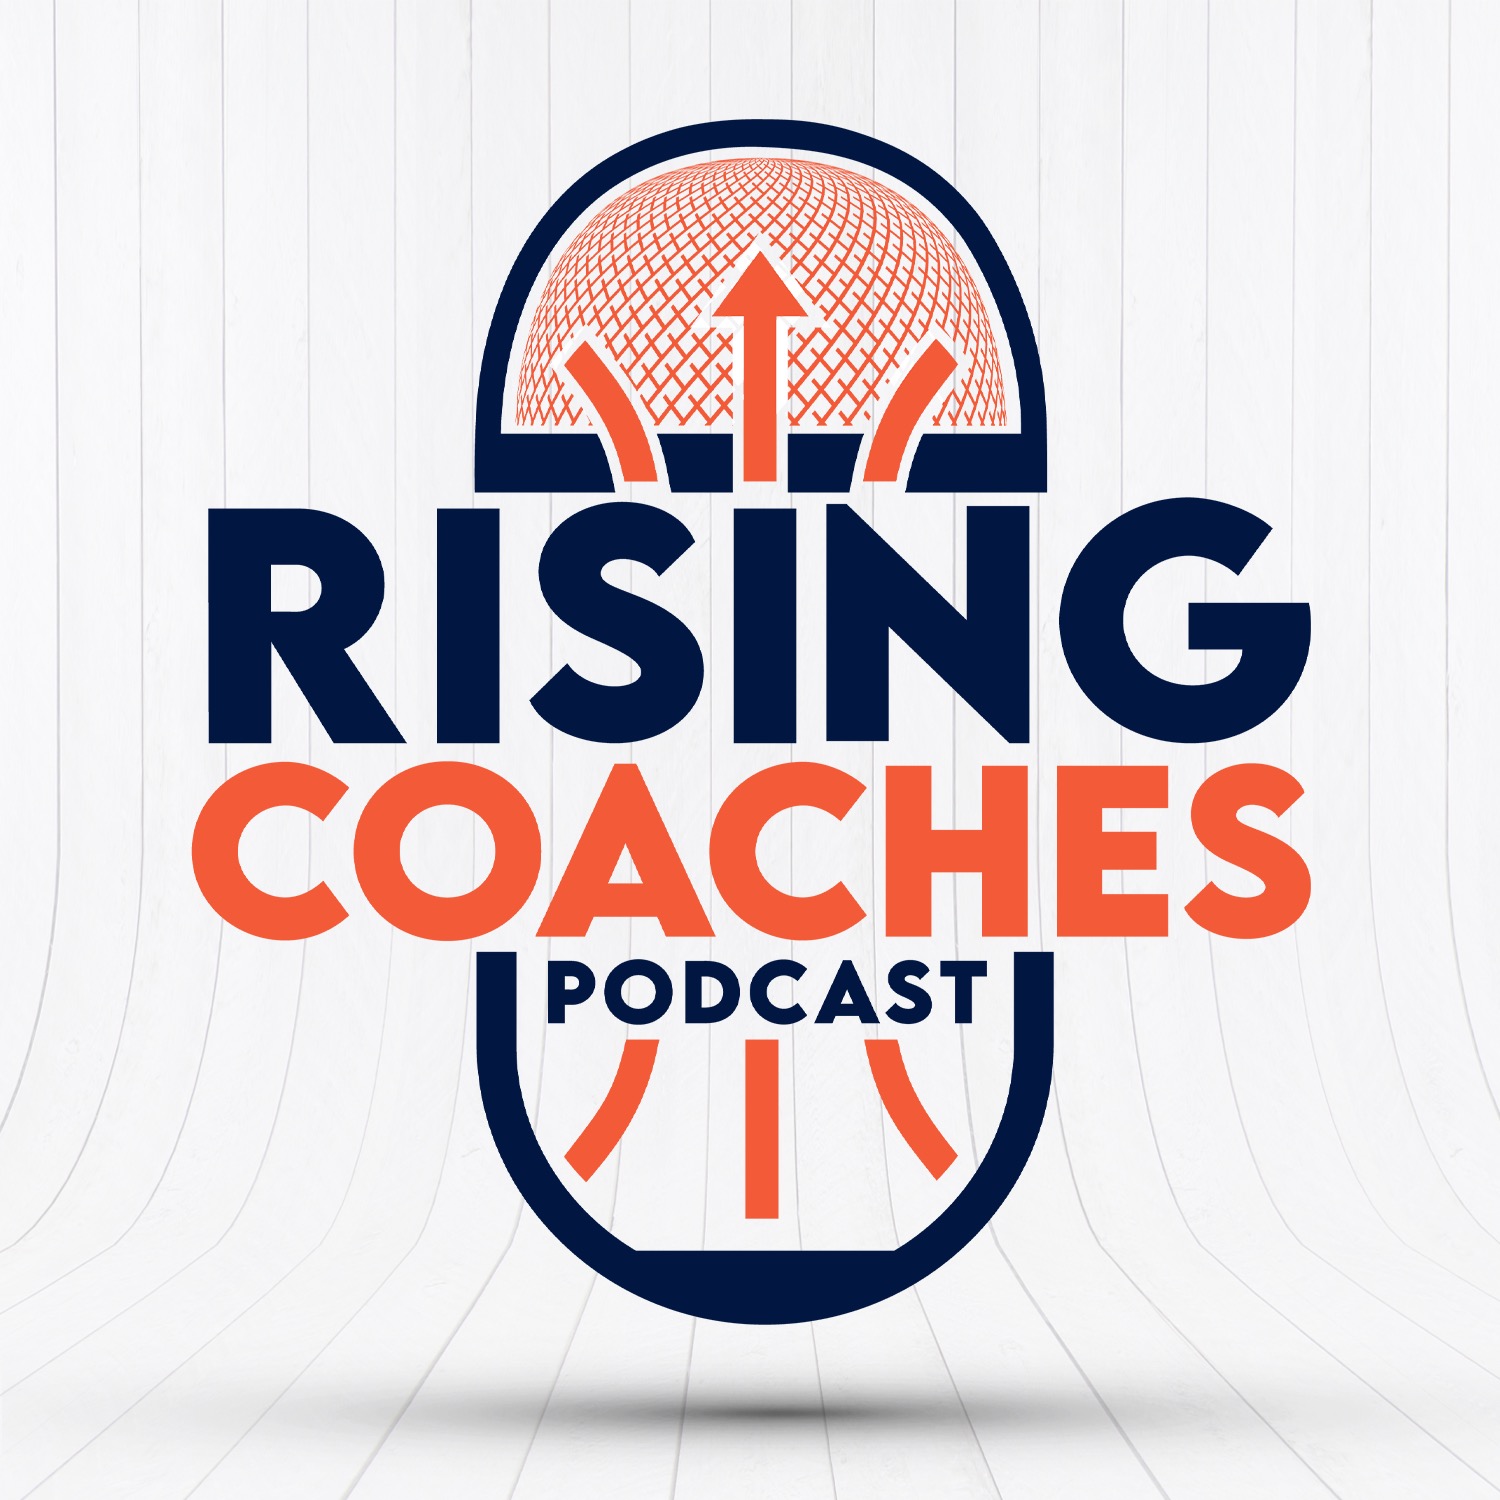 The Rising Coaches Podcast's artwork